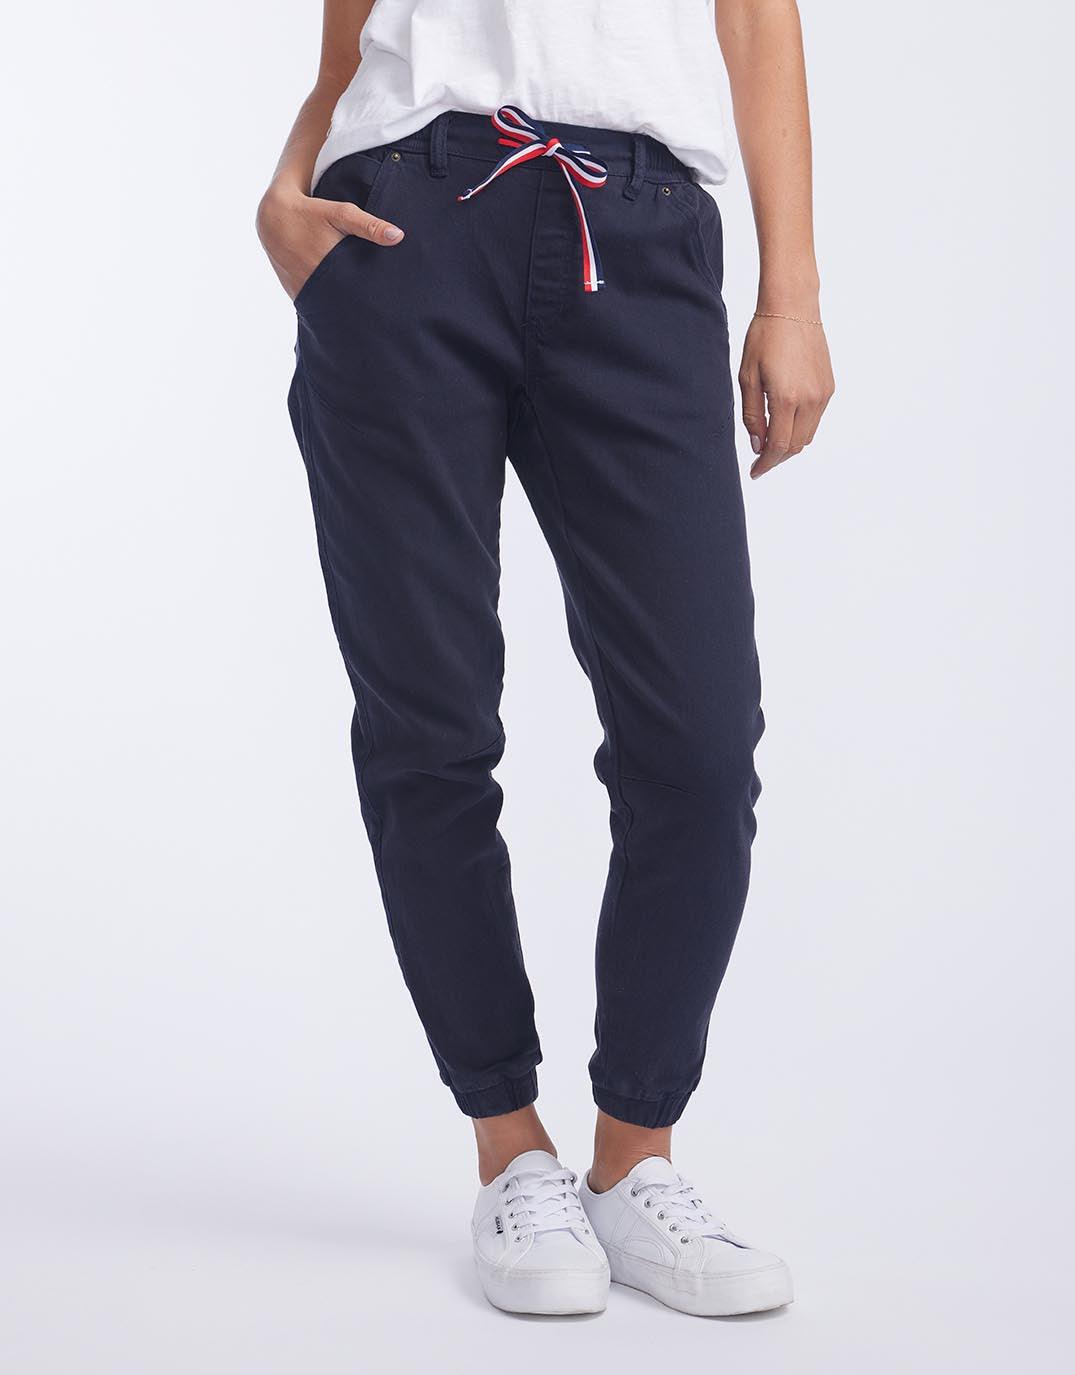 Buy Libby Jogger - French Navy Saint Rose for Sale Online New Zealand ...